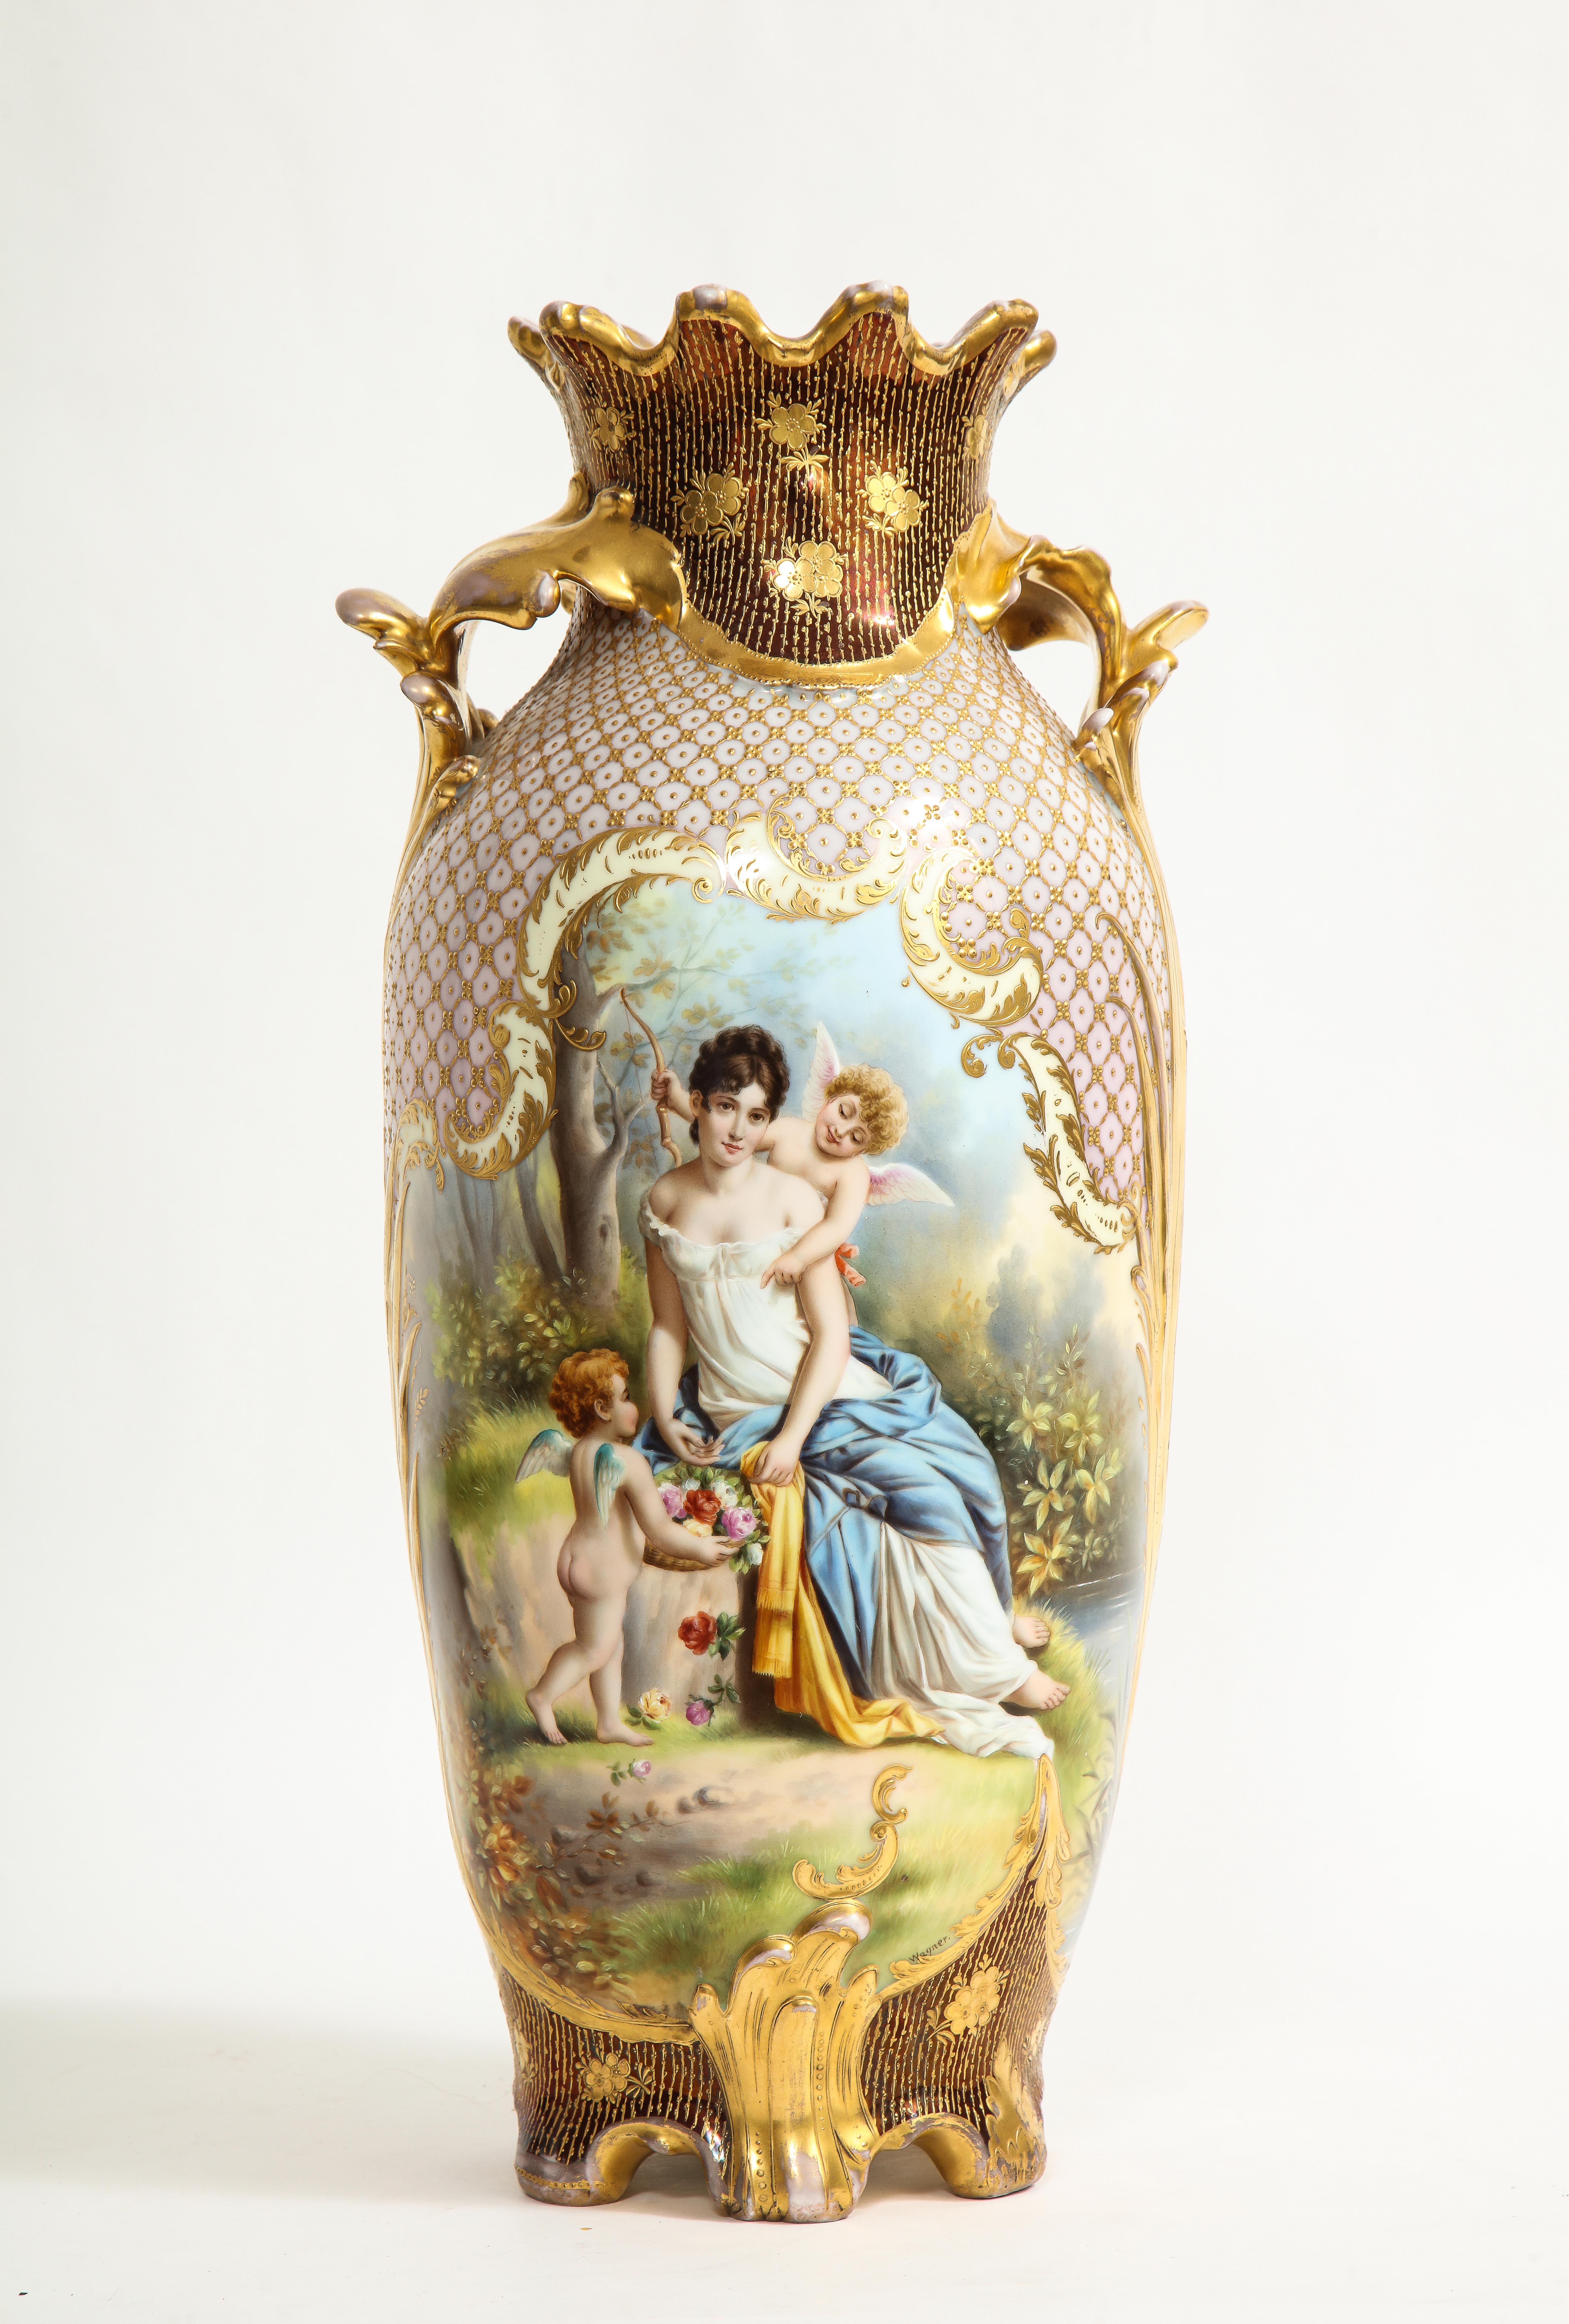 An exceptional 19th century Royal Vienna porcelain vase with two panels and raised 24K gilt decoration, signed Wagner, marked in underglaze blue with Beehive mark on bottom. This is truly a masterpiece vase hand-painted by one of the porcelain